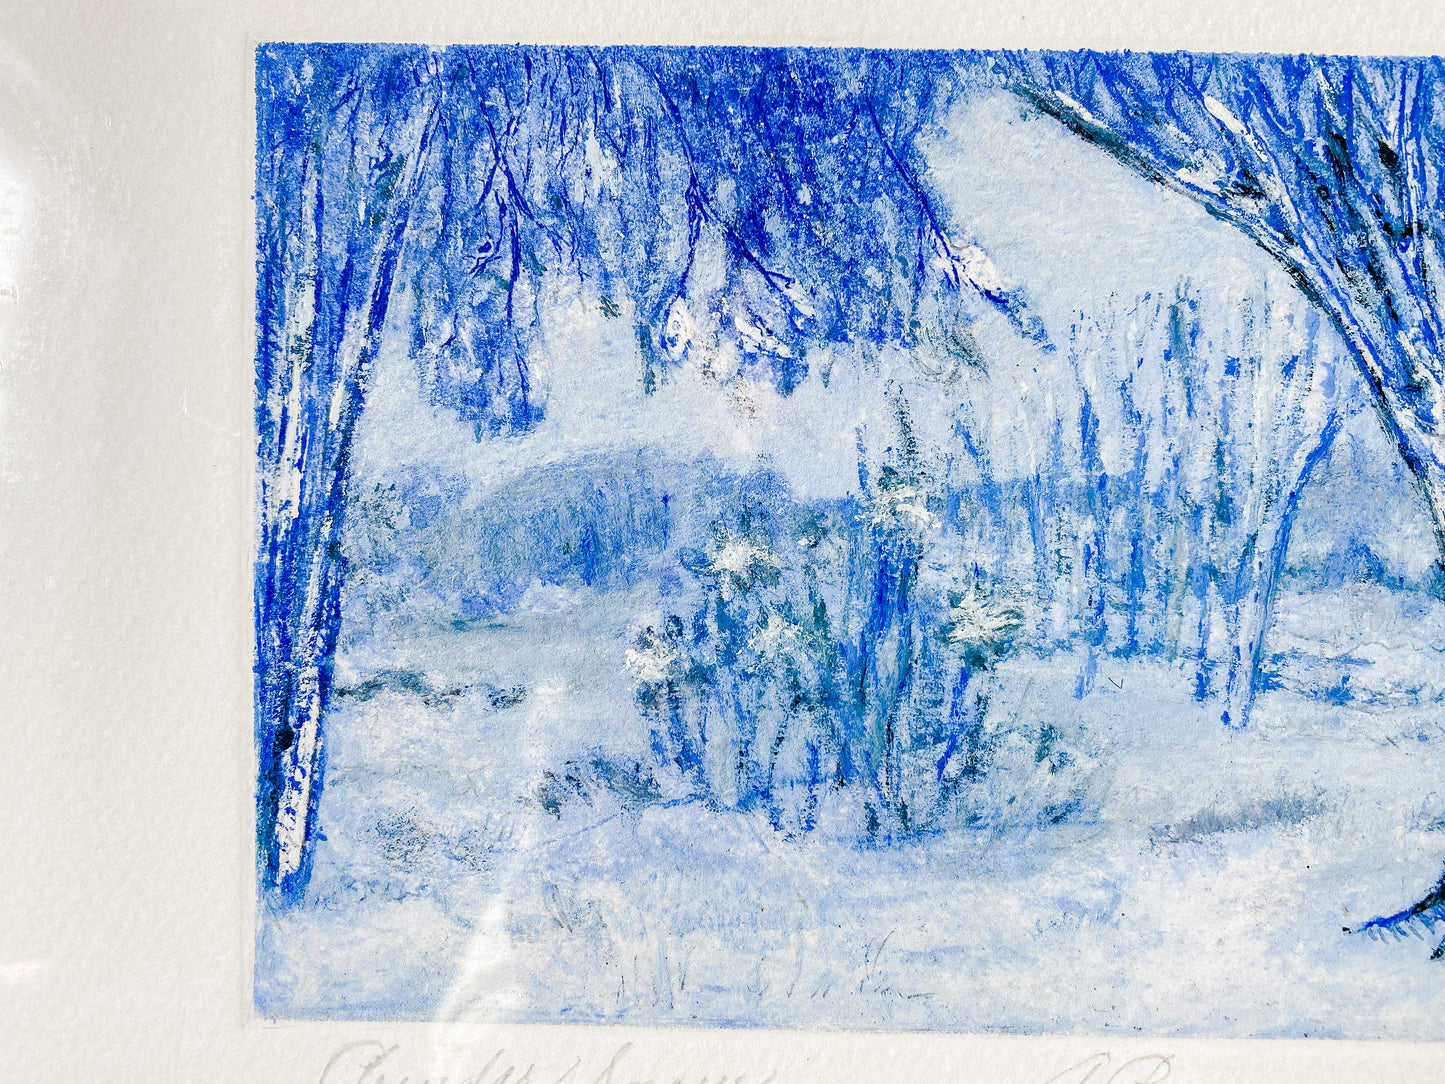 'Powdered Snow' by Shirley Davis Coleman, Blue Colored Etching Artist's Proof, 1984